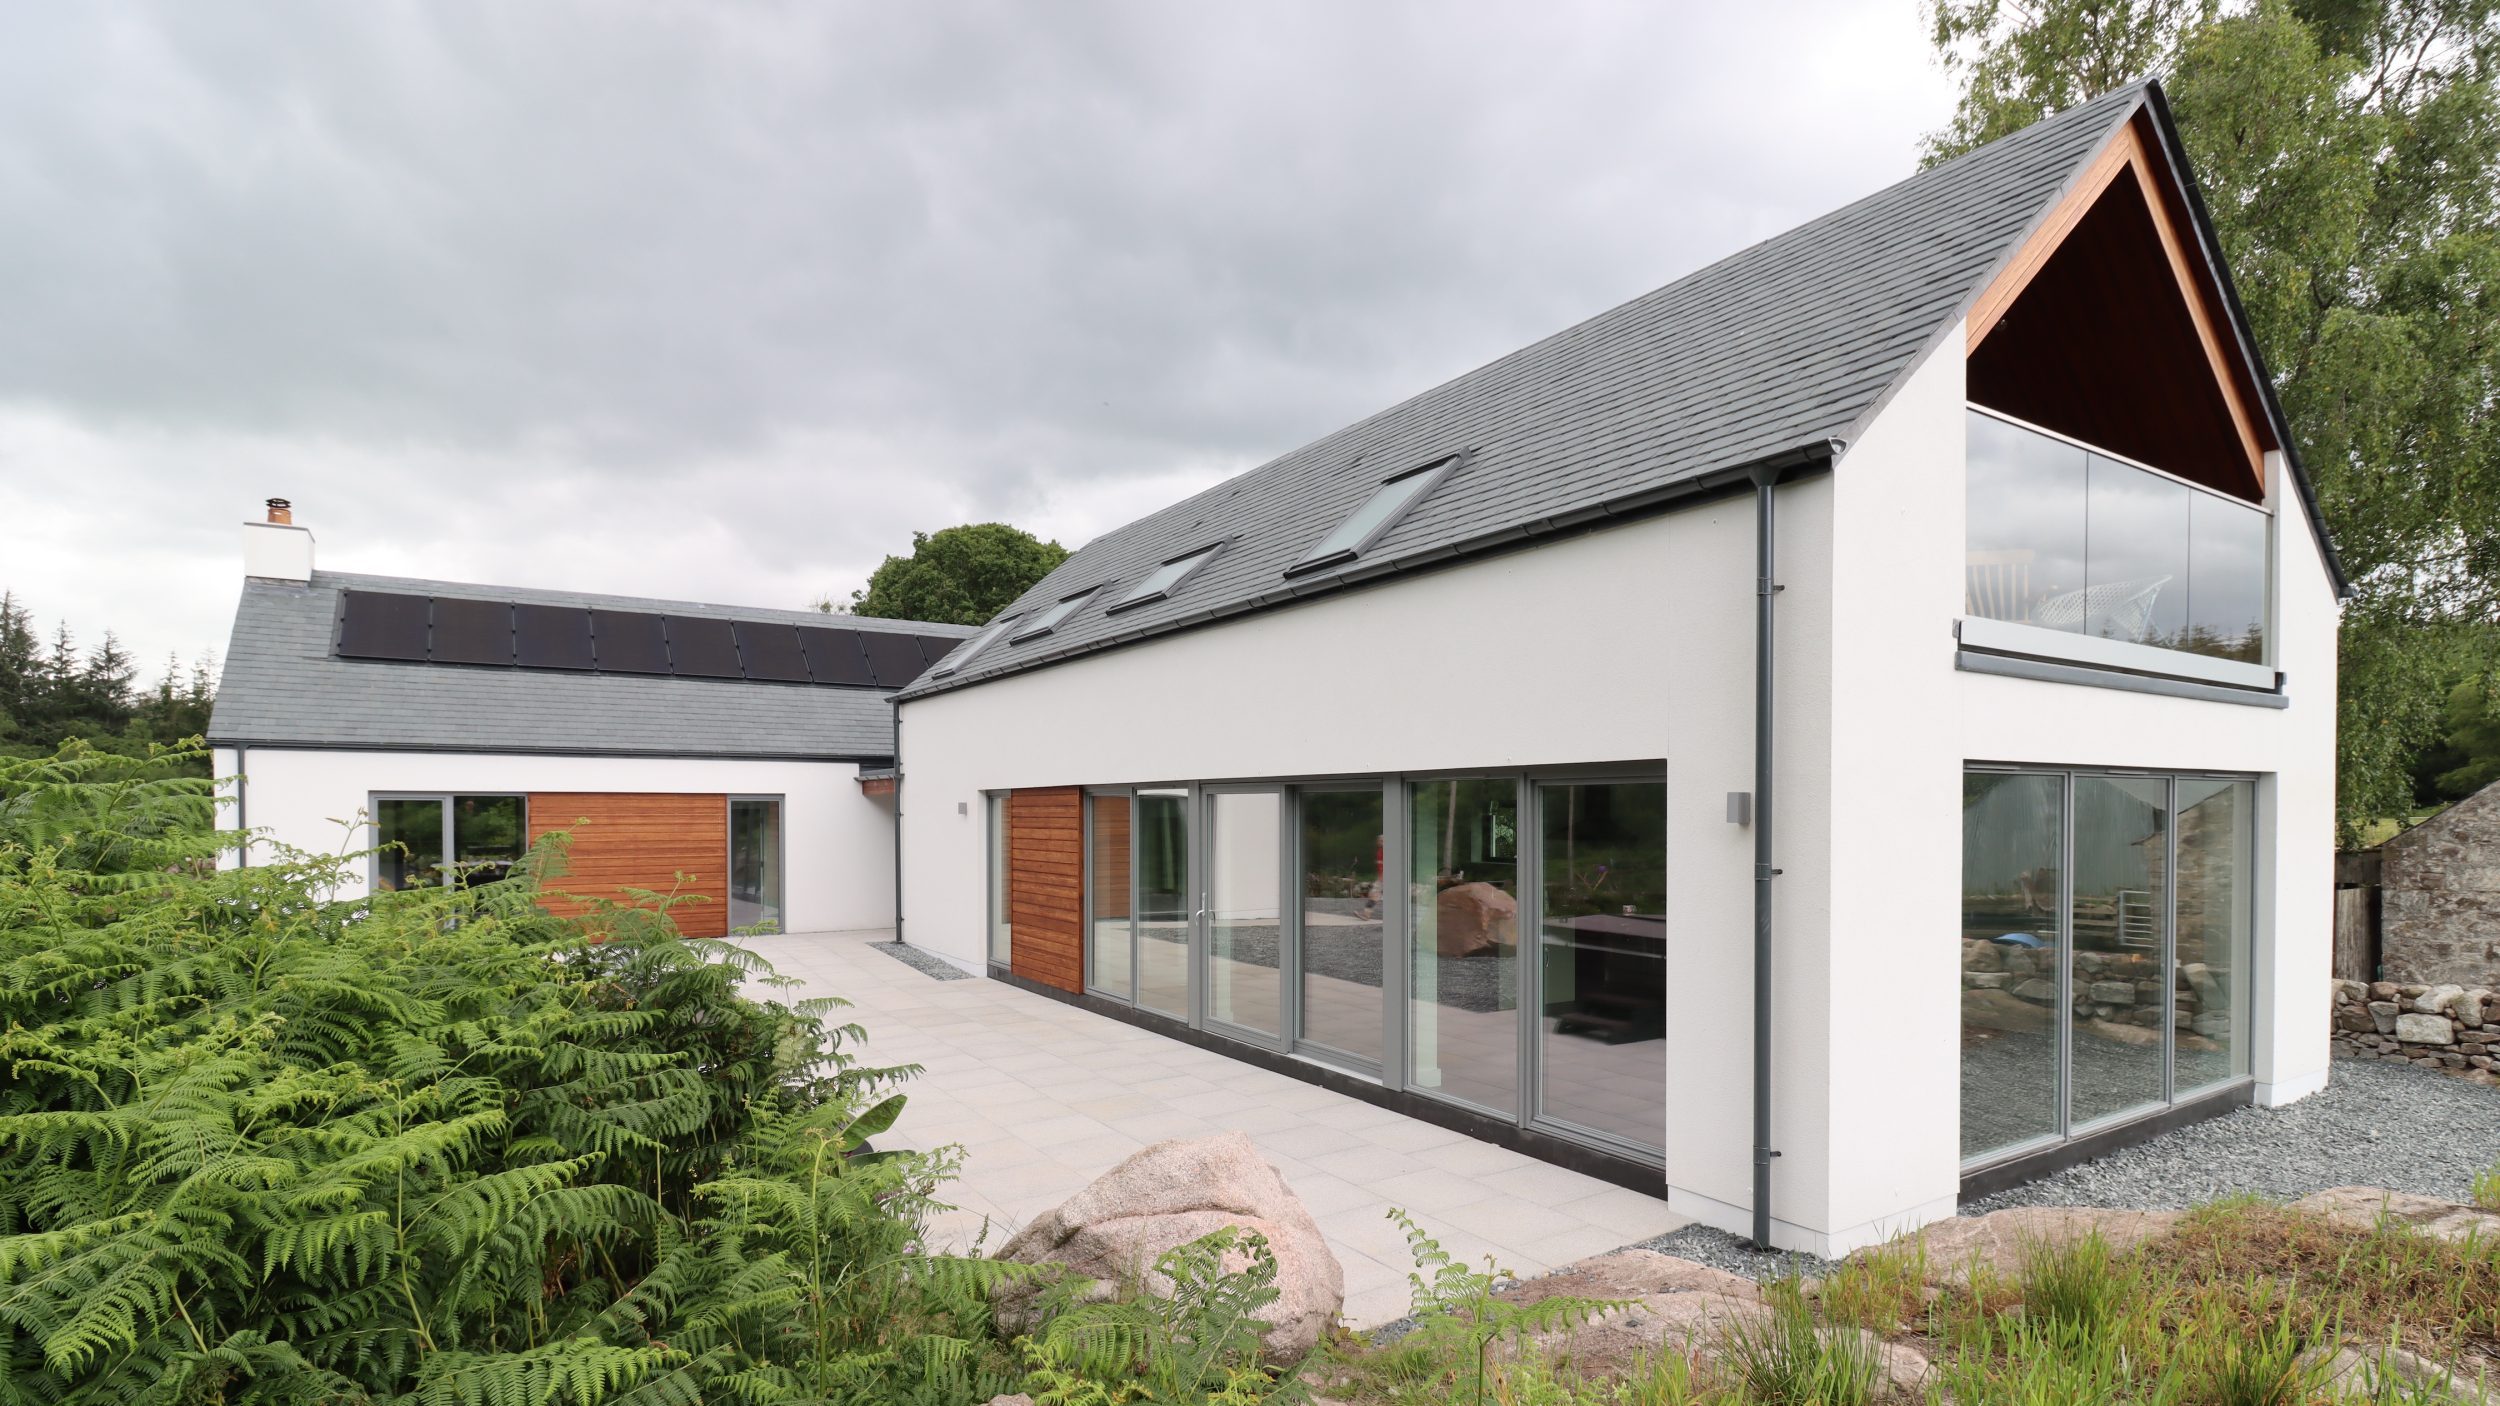 home designed by Graeme Ditchburn architect based in Dumfries and Galloway